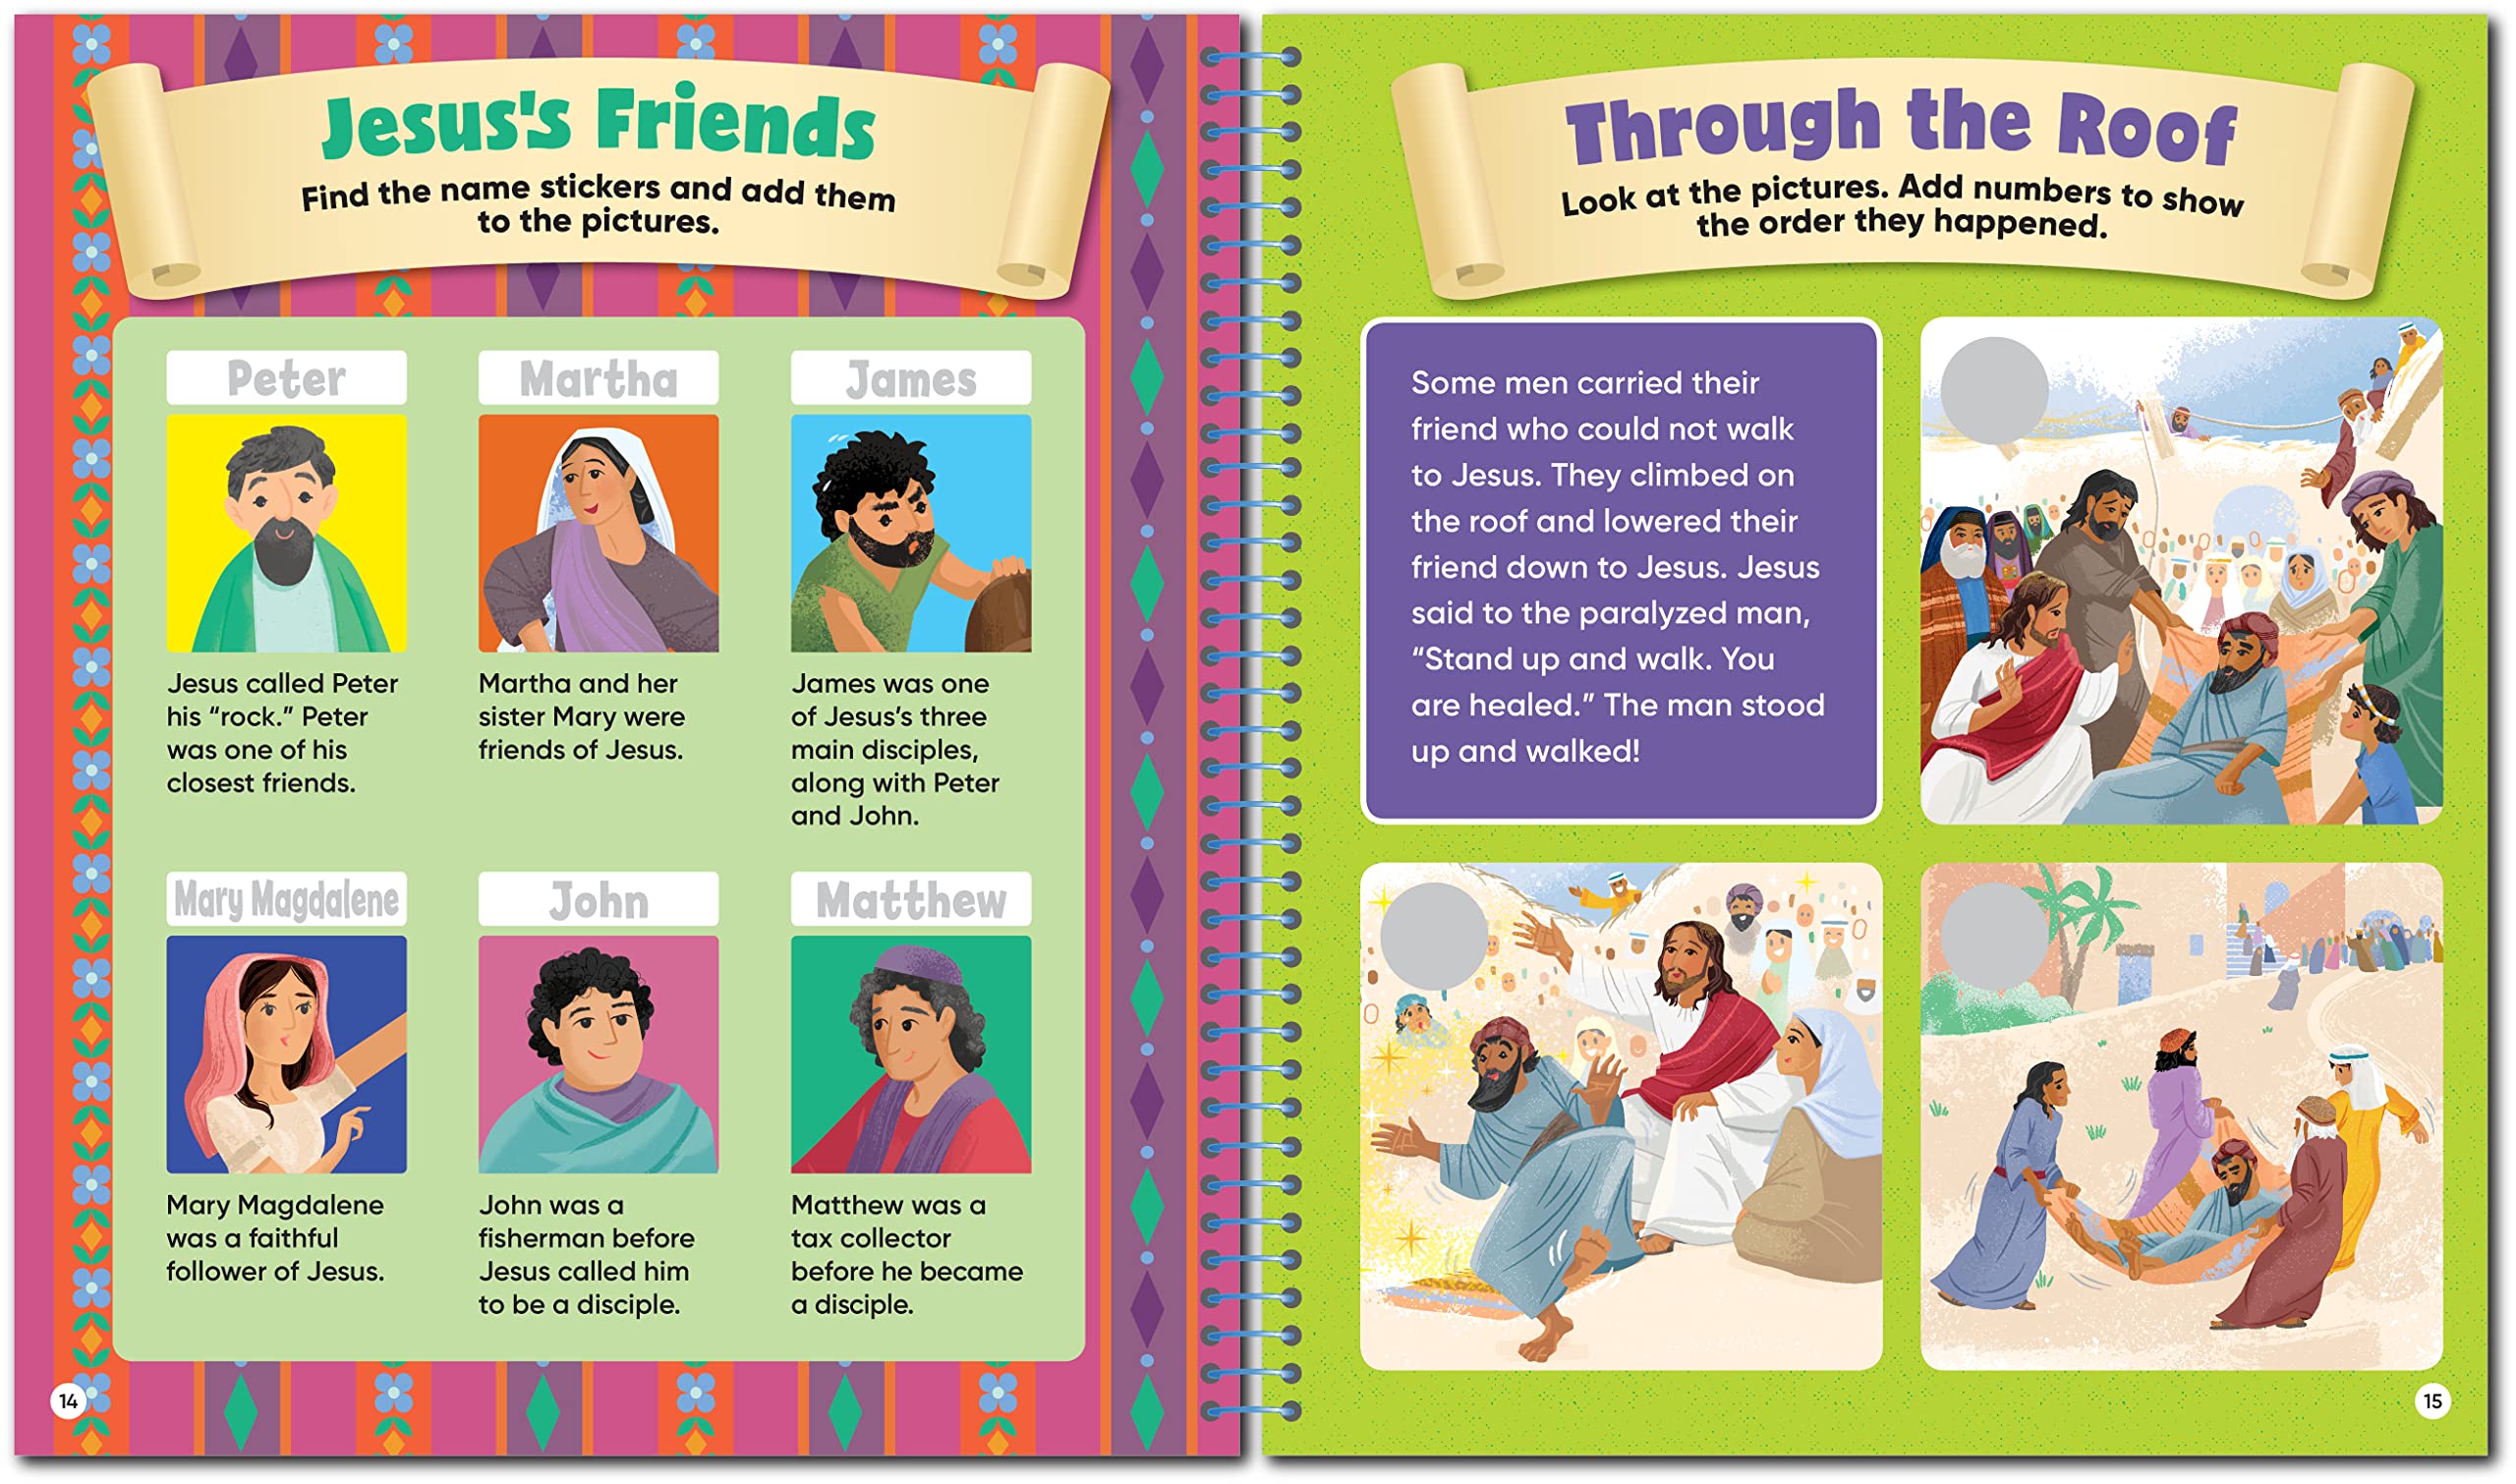 Brain Games - Sticker Activity: Stories of Jesus (For Kids Ages 3-6)